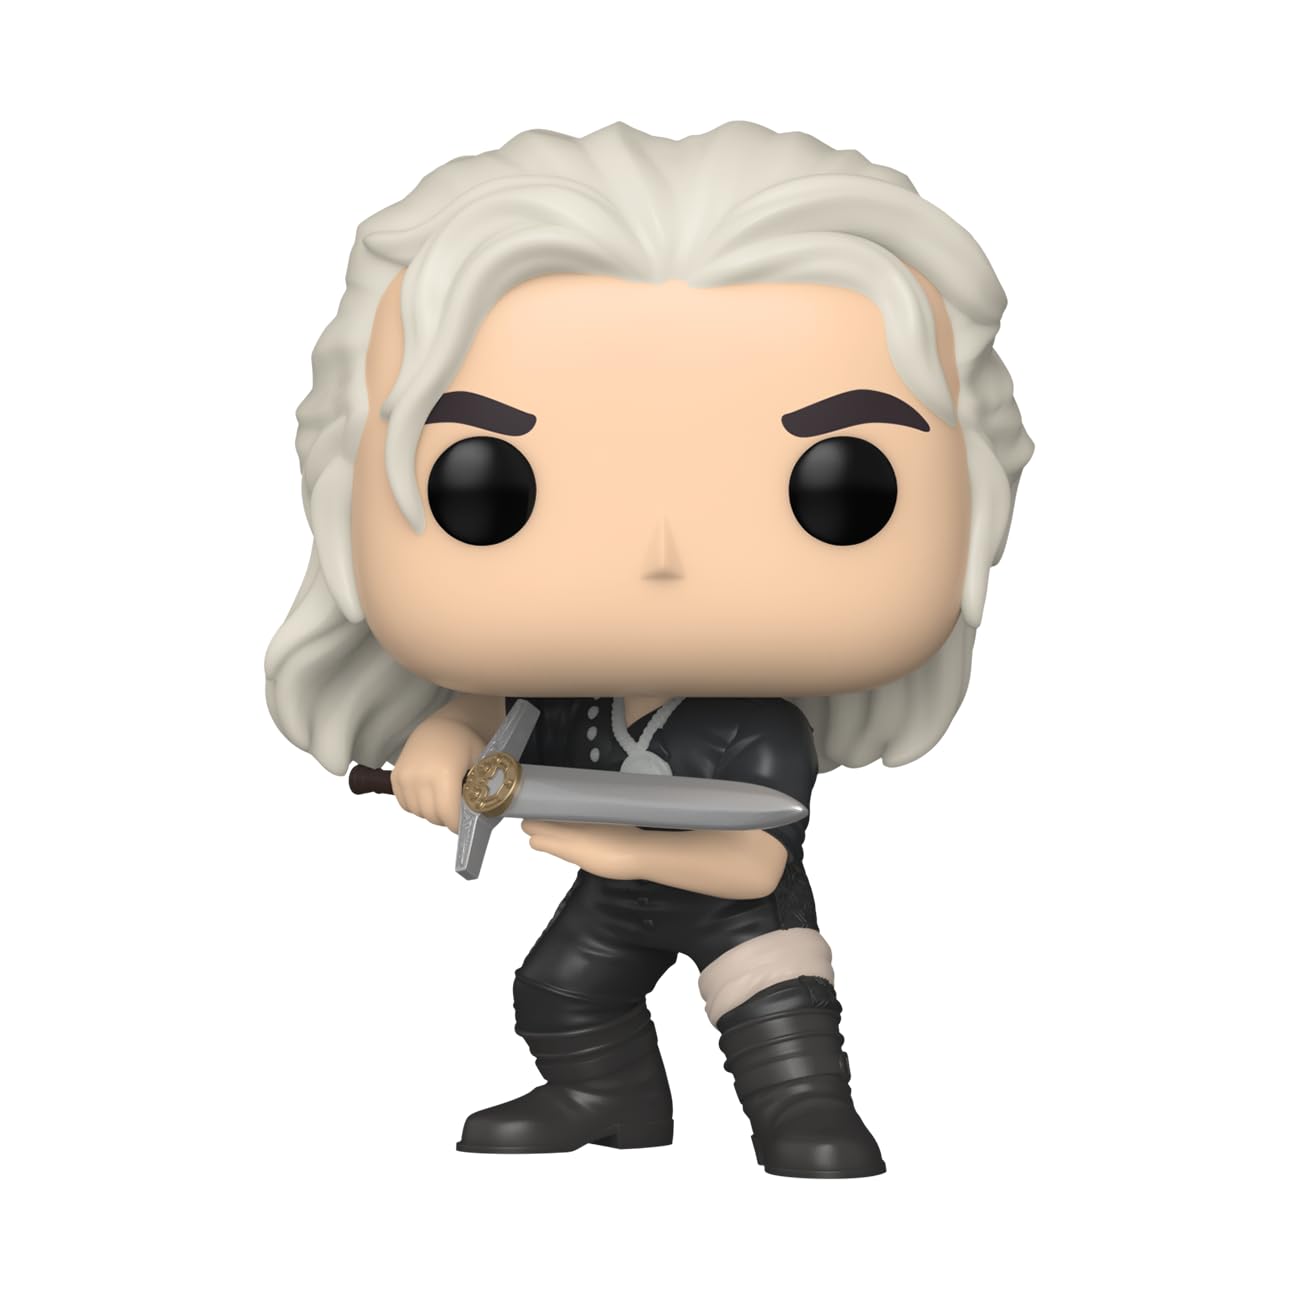 Funko Pop! Television: The Witcher - Geralt (Training) Shop Exclusive